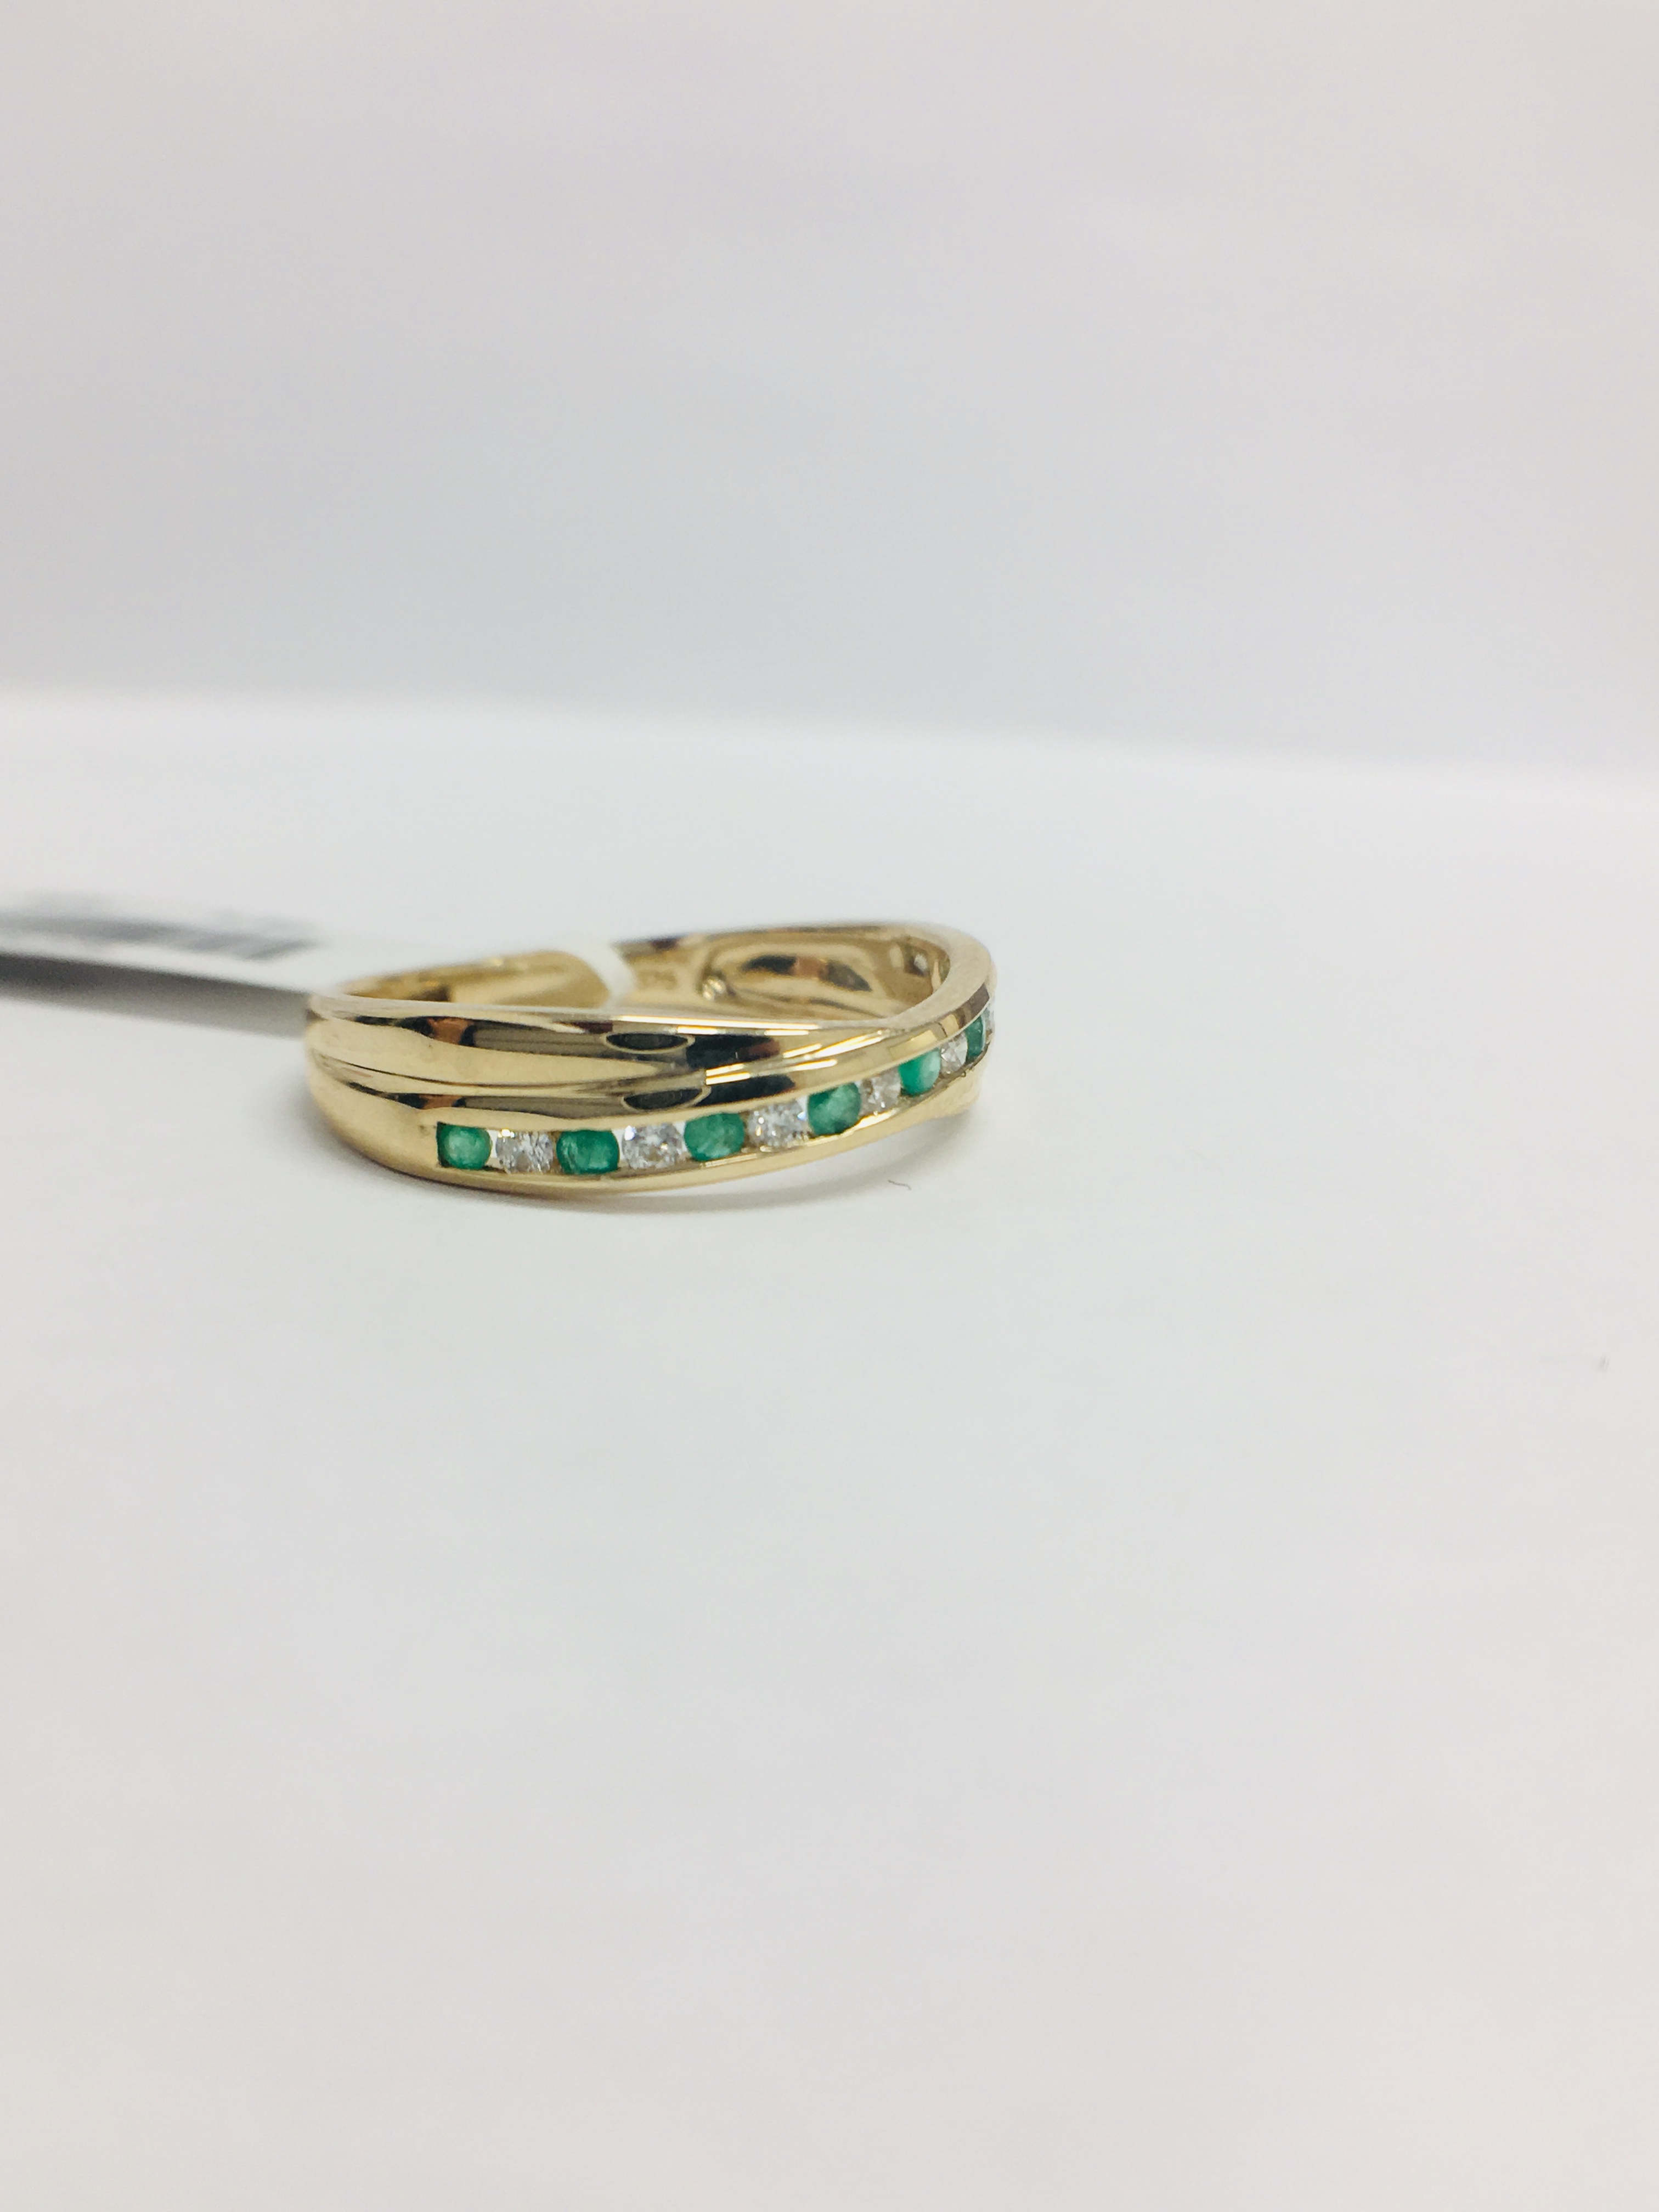 9Ct Yellow Gold Emerald Diamond Crossover Band Ring, - Image 8 of 11